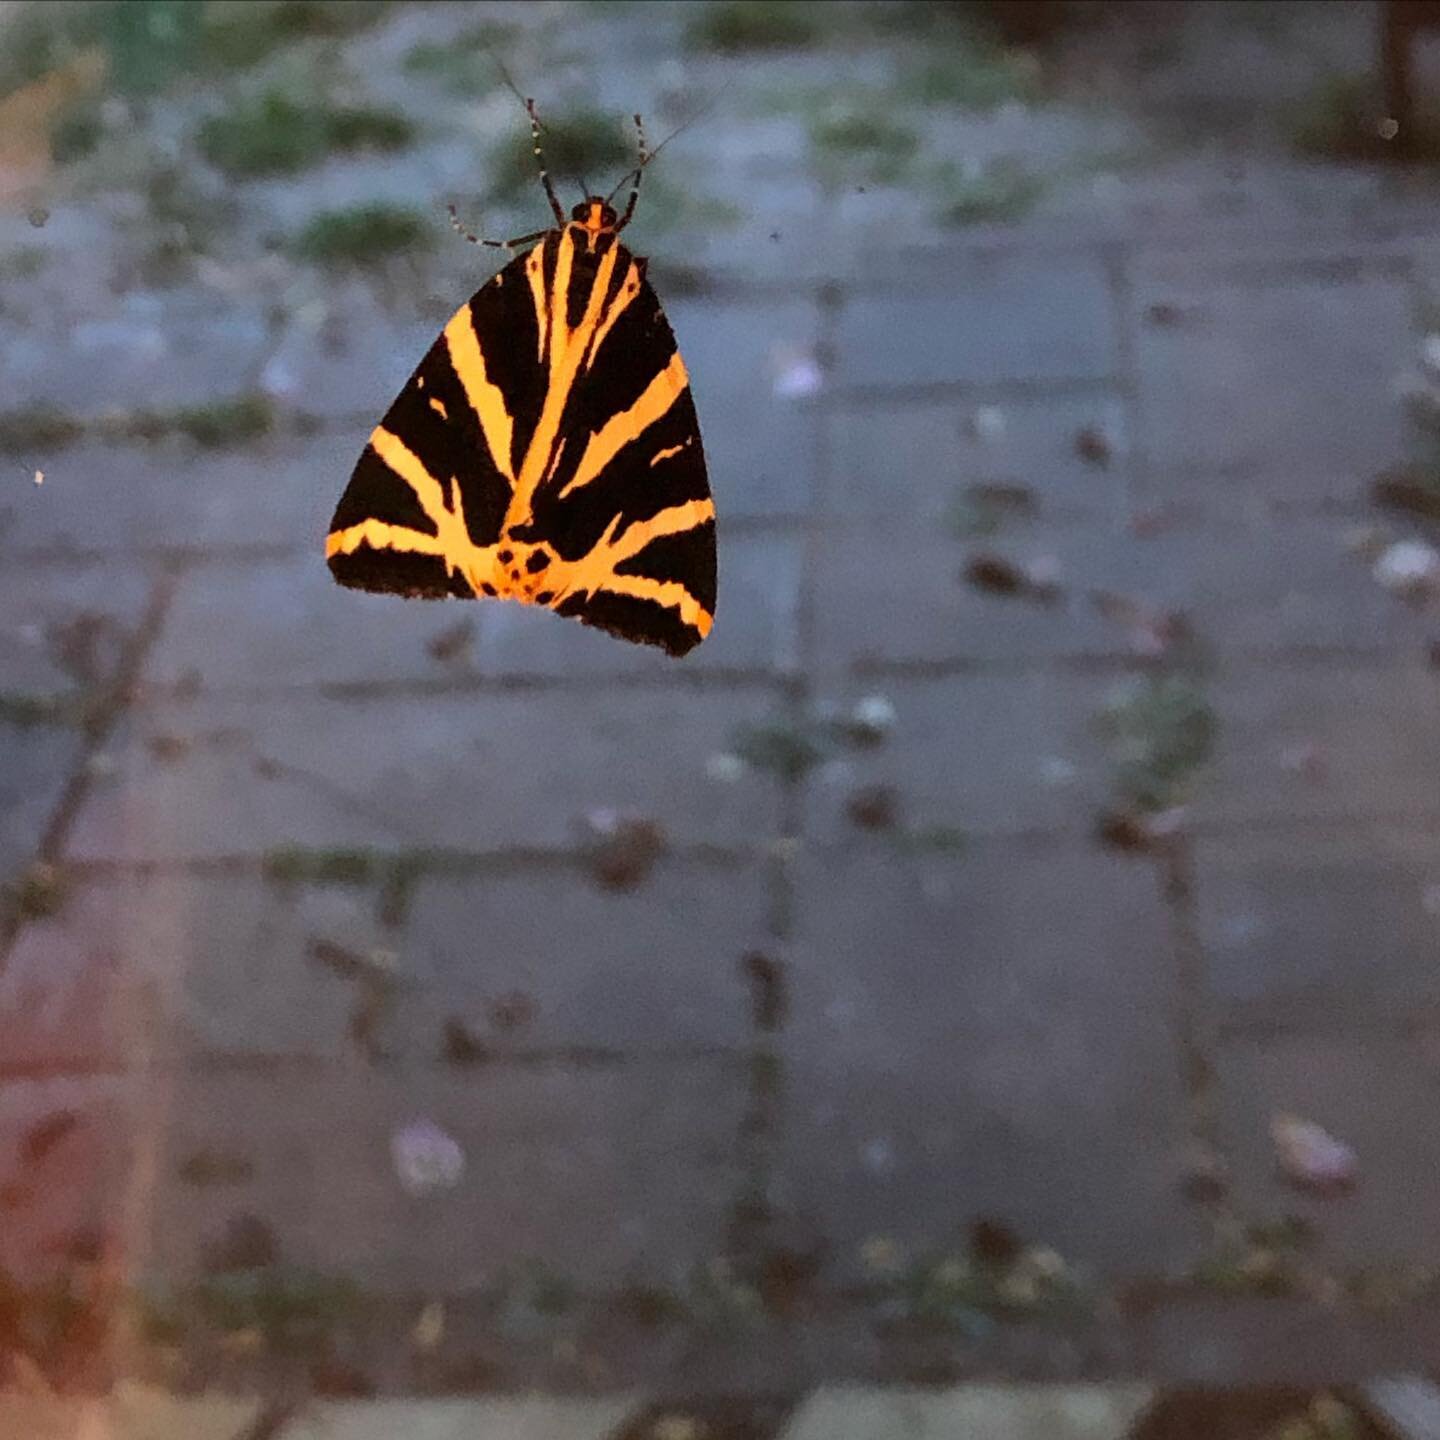 This one fluttered in last night and refused to leave. When I came back to check on her, she&rsquo;d stretched her wings out against the cool glass.